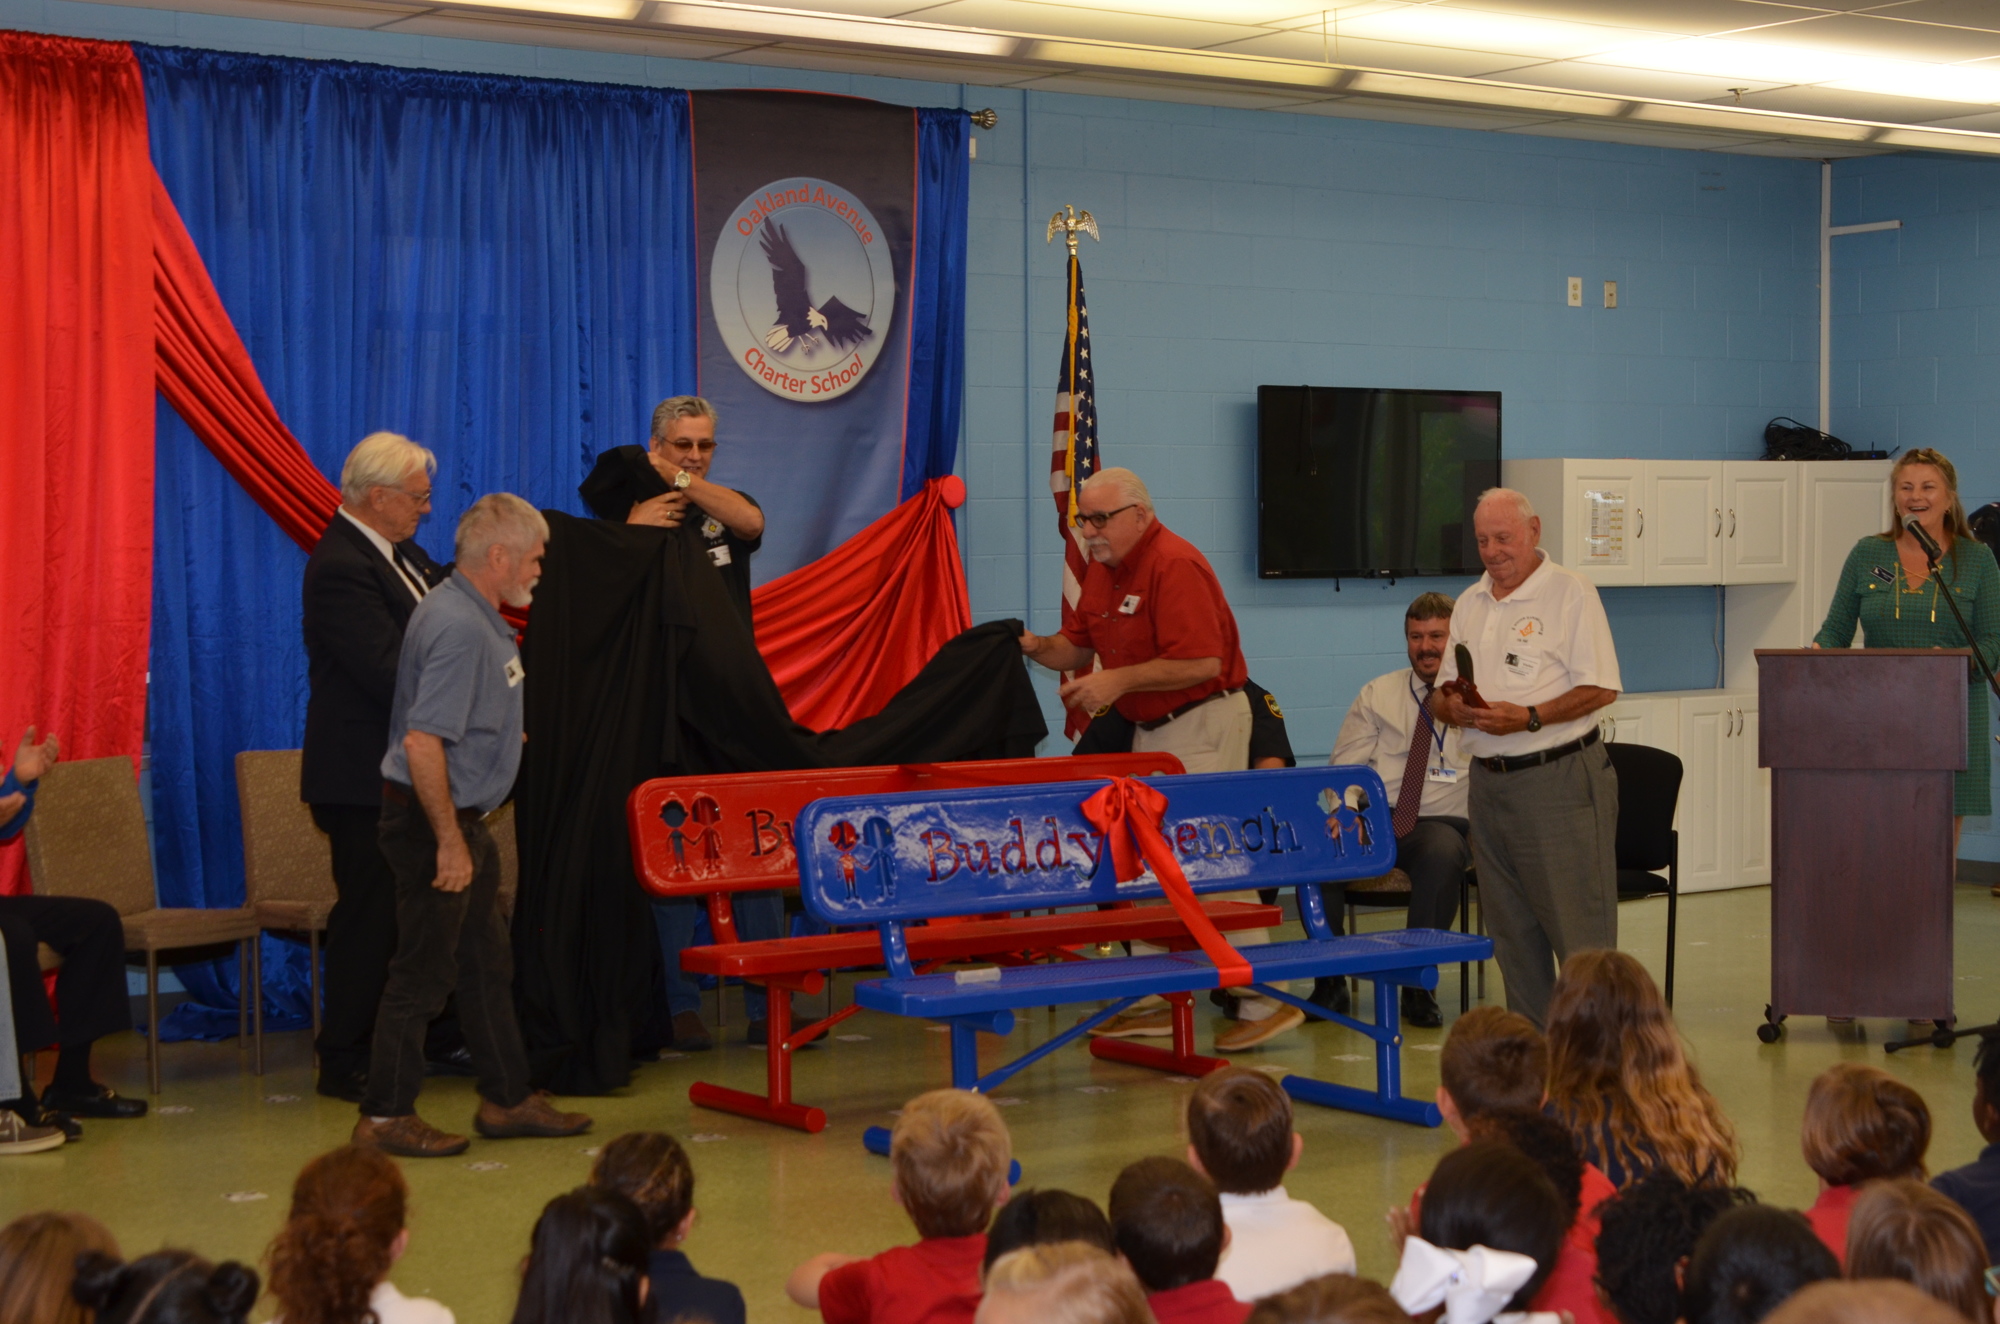 Members of Winter Garden Masonic Lodge No. 165 F&AM unveil the two new Buddy Benches at Oakland Avenue Charter School.